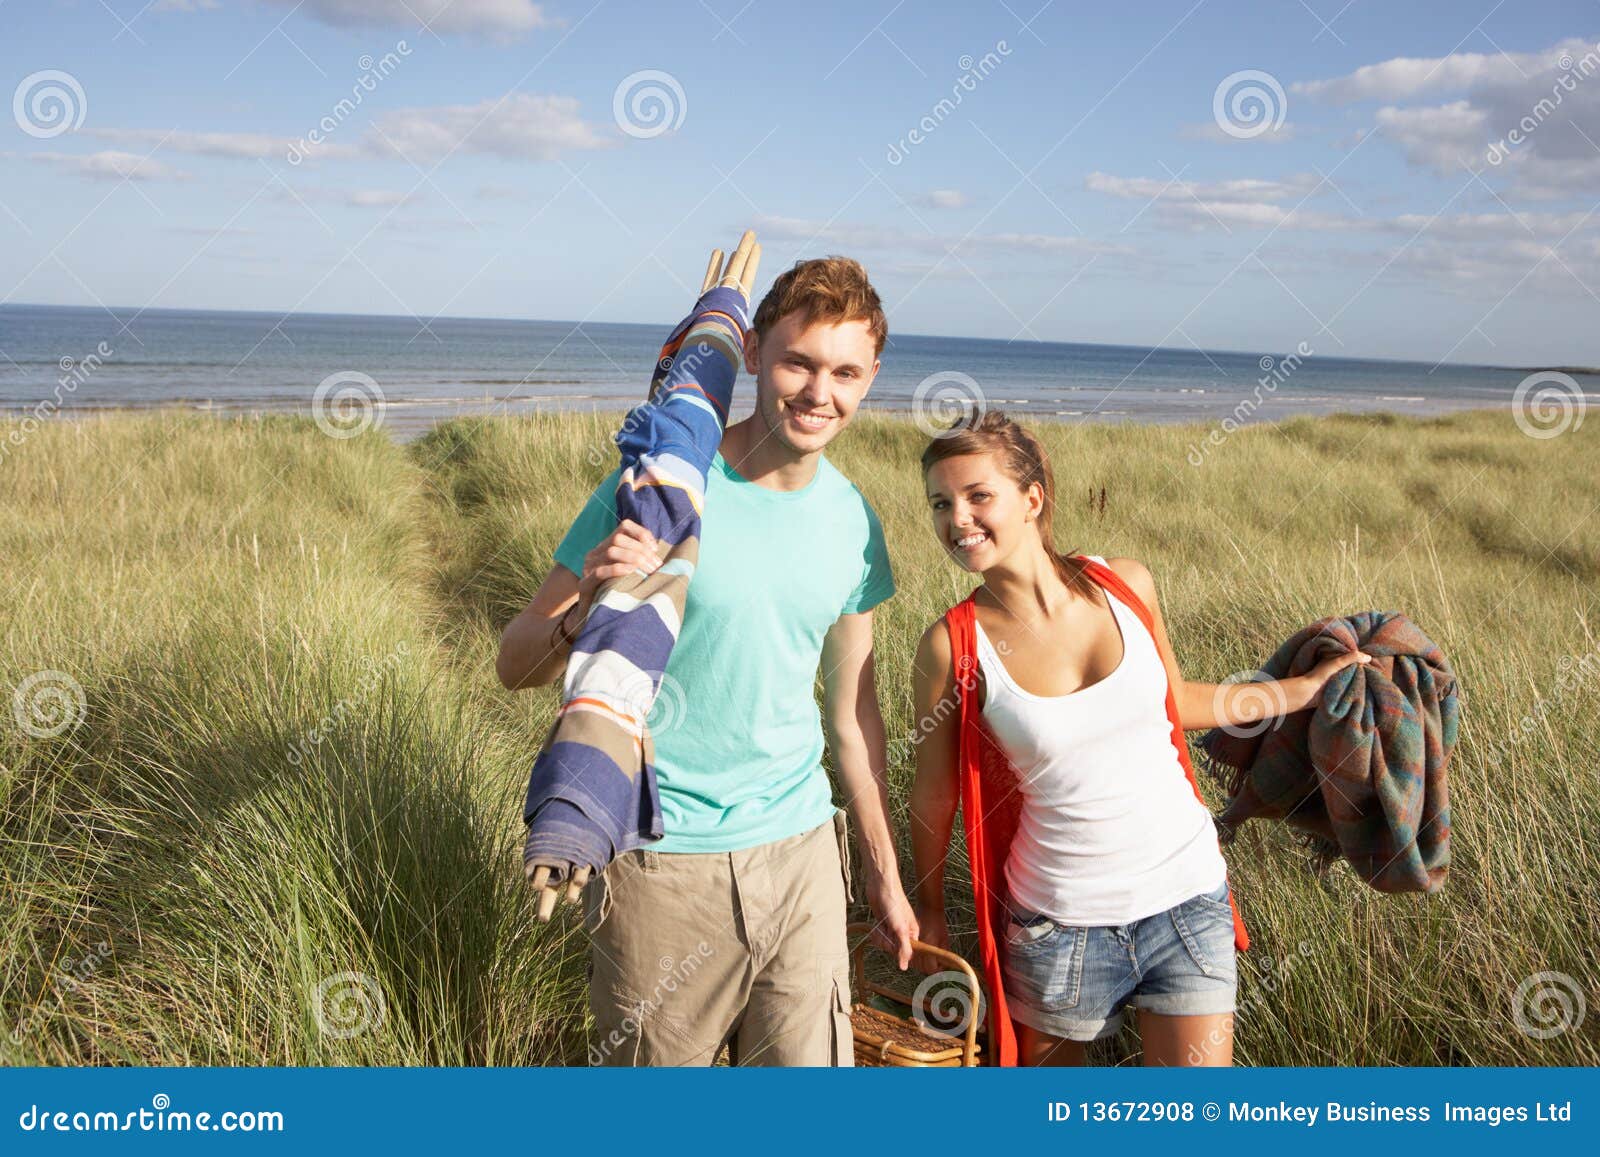 young couple carrying picnic basket and windbreak